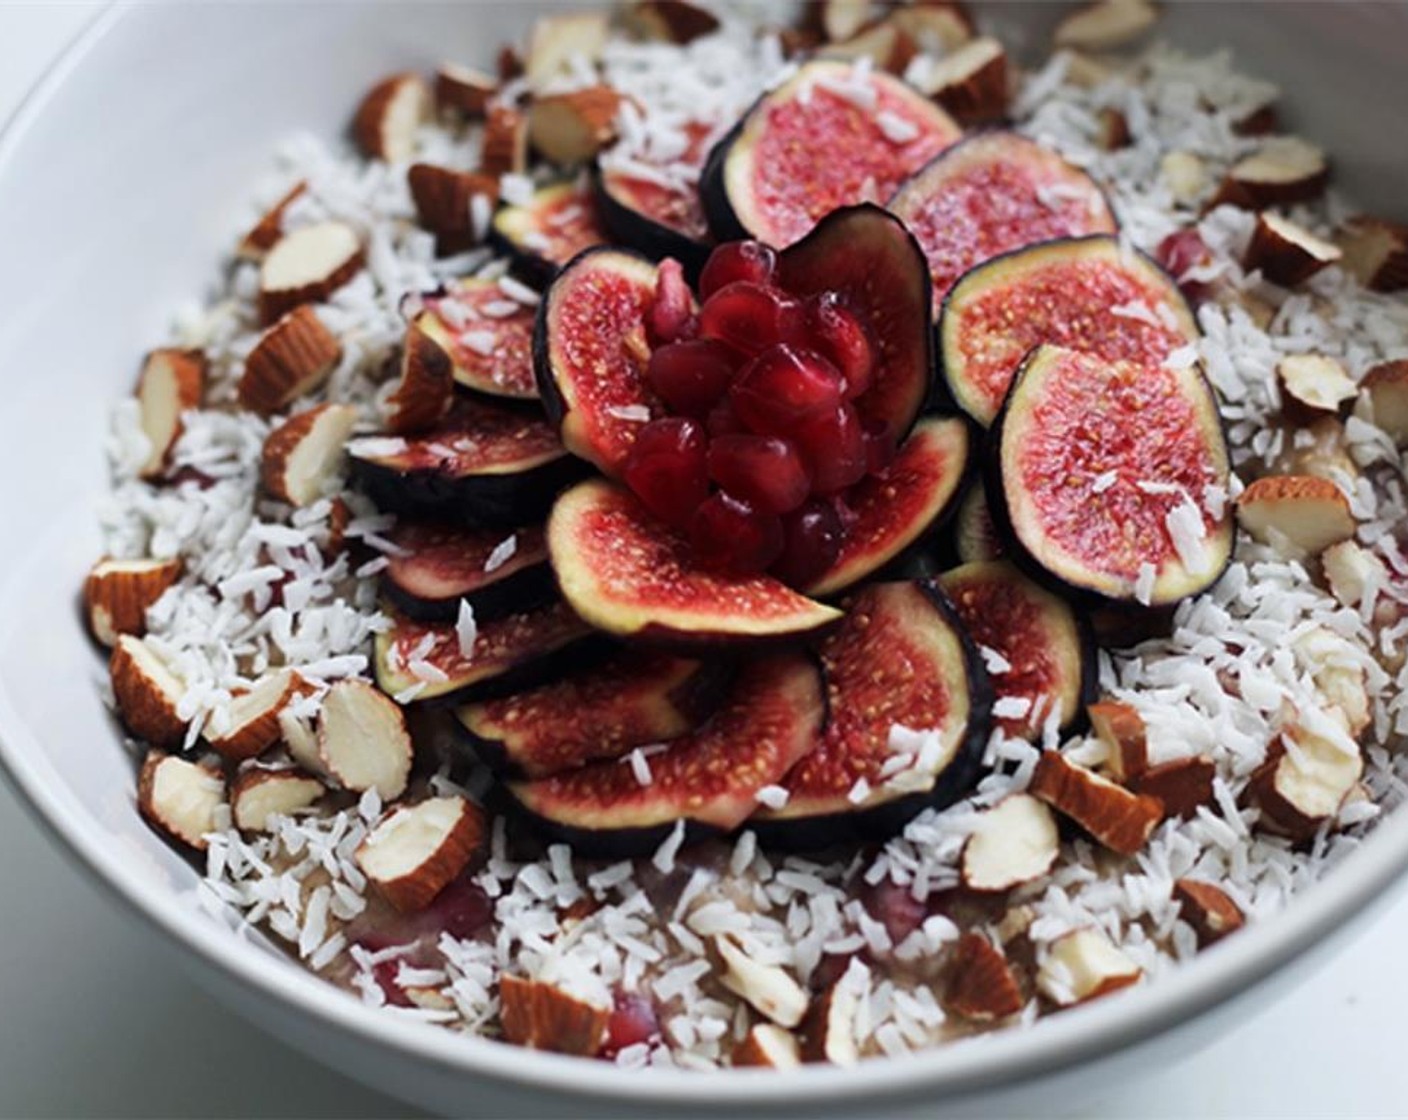 step 5 After that it’s up to you! I made my figs into a little flower pattern and scattered the Almonds (10) and Unsweetened Shaved Coconut (2 Tbsp) all around. Let your artistic soul break free on your oatmeal. Serve and enjoy!